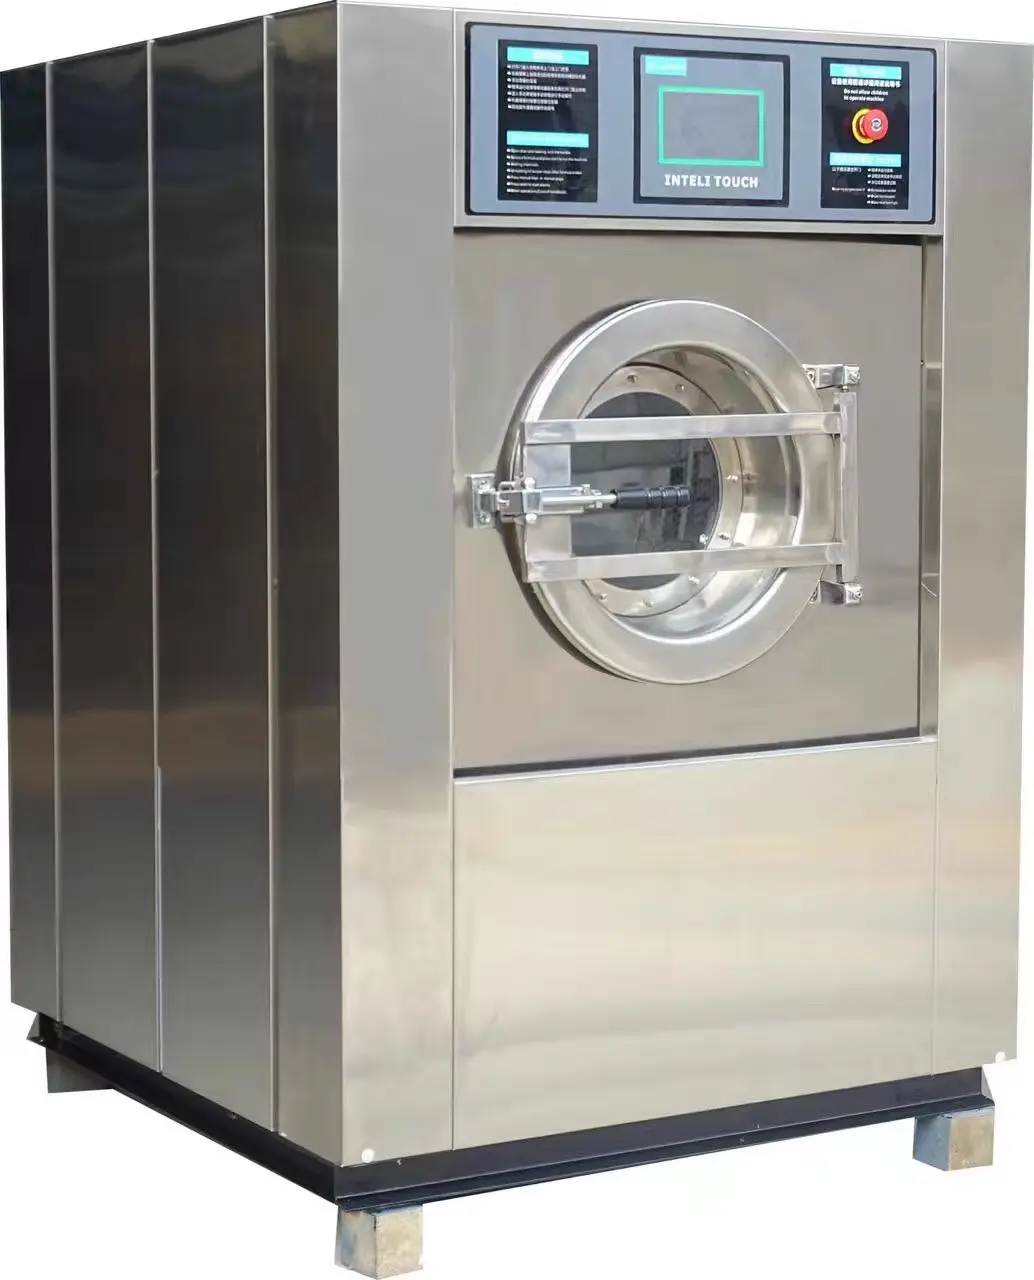 20kg washer Machine Prices Steel Germany Stainless Power Time Technical Parts Sales Video Hotel ISO